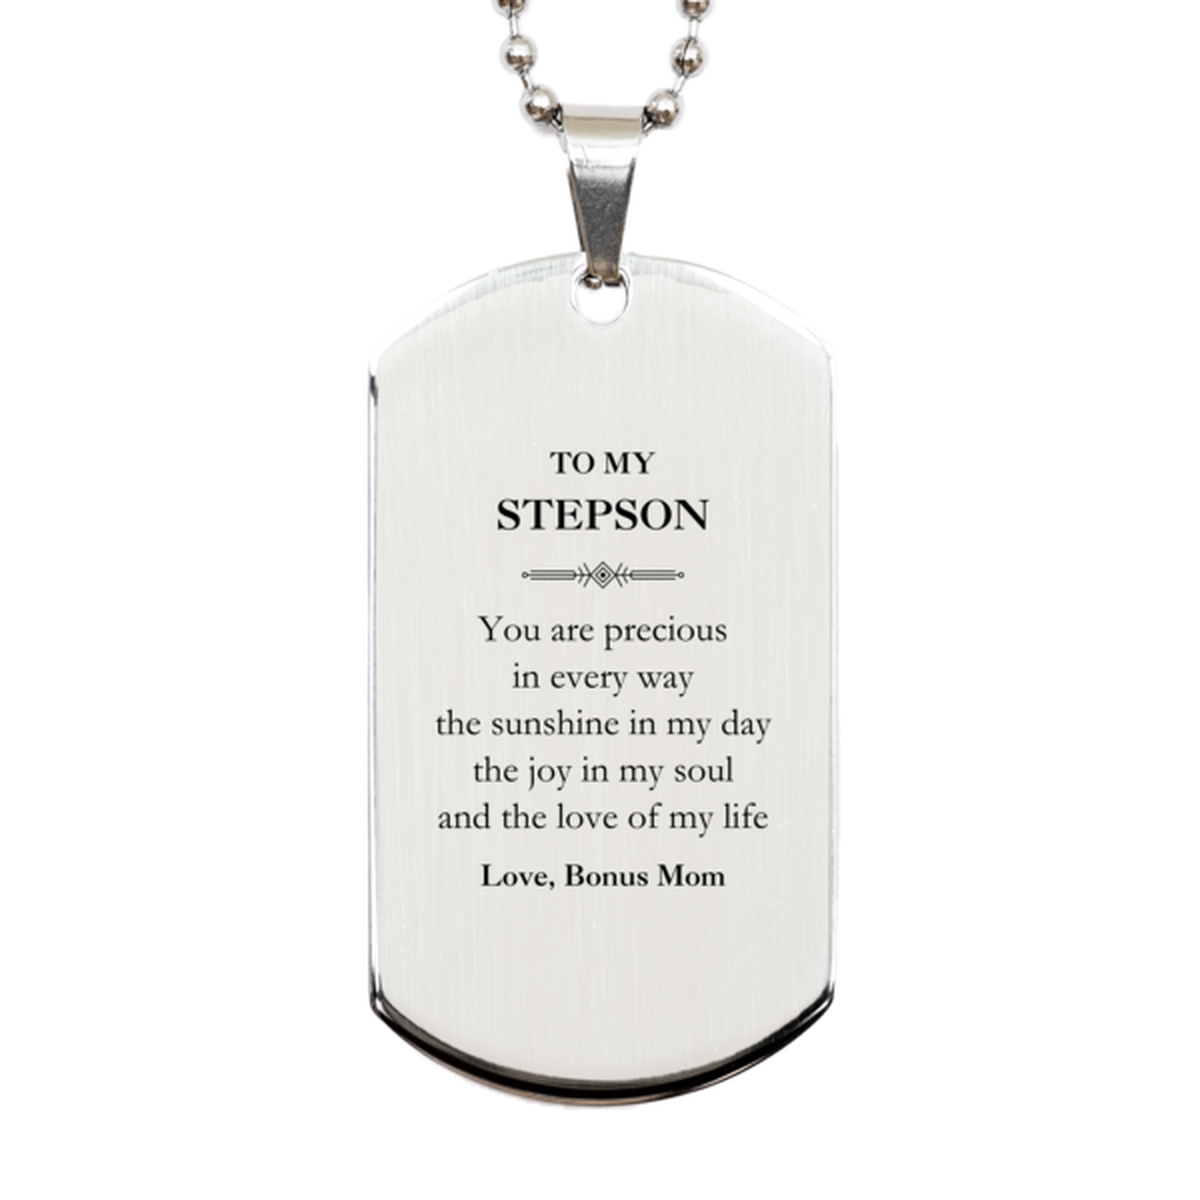 Graduation Gifts for Stepson Silver Dog Tag Present from Bonus Mom, Christmas Stepson Birthday Gifts Stepson You are precious in every way the sunshine in my day. Love, Bonus Mom